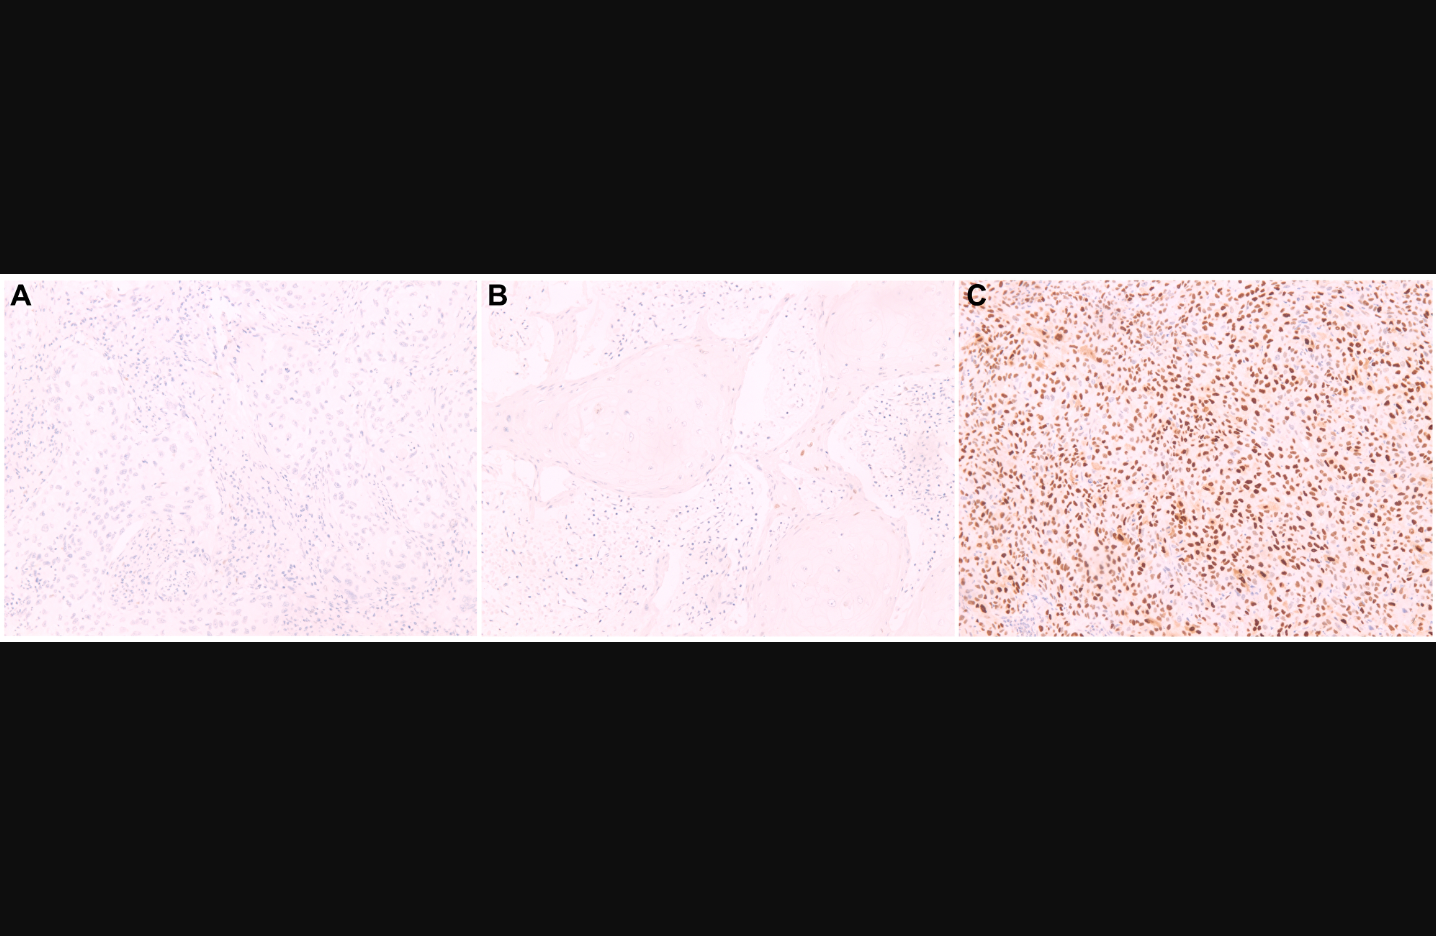 Figure 1: Cyclin D1 protein expression by immunohistochemistry in histological sections.